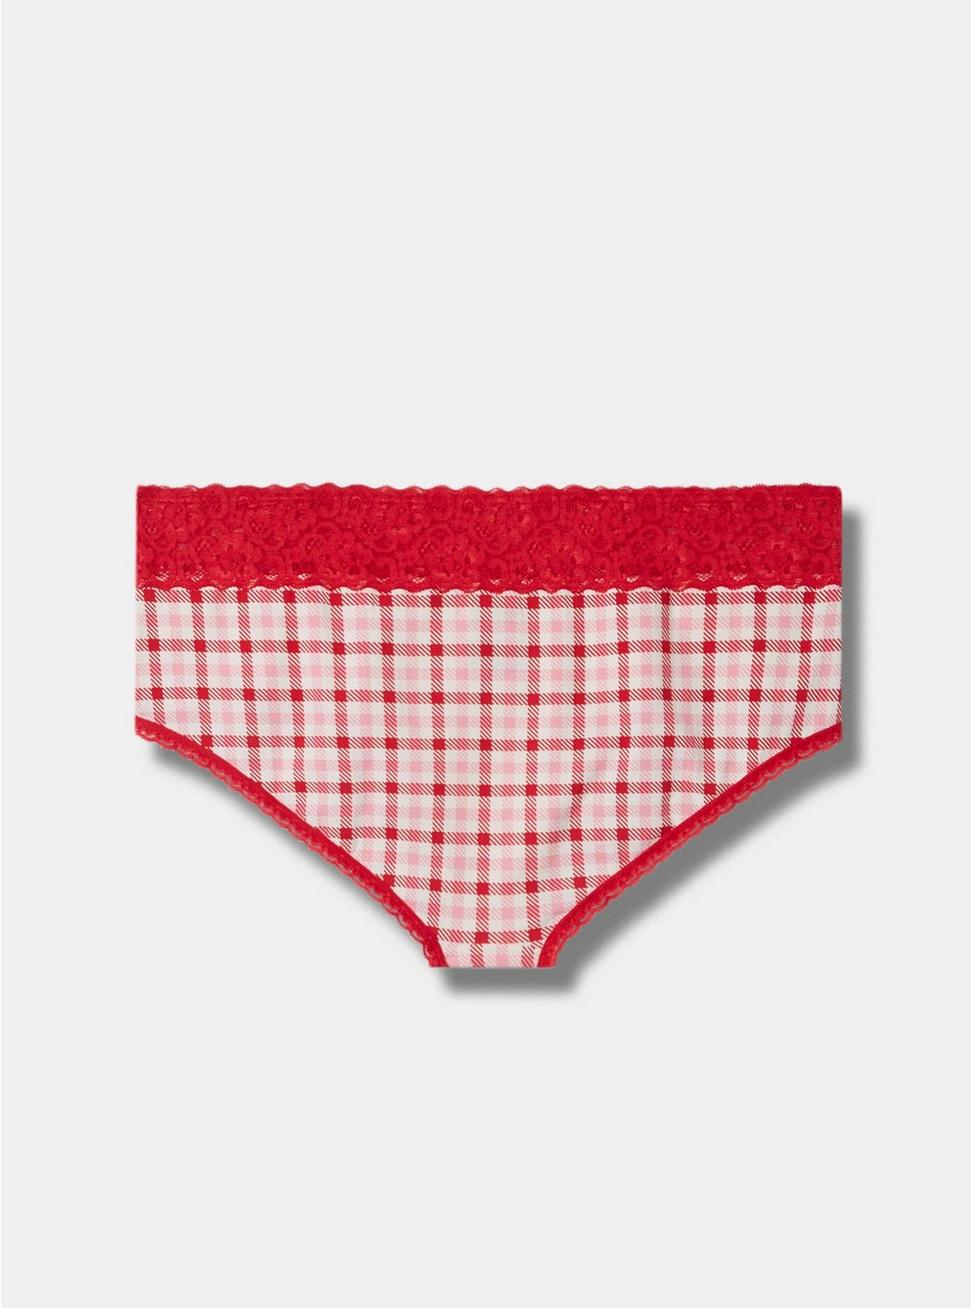 Cotton Mid-Rise Cheeky Lace Trim Panty, RASPBERRY GINGHAM, alternate